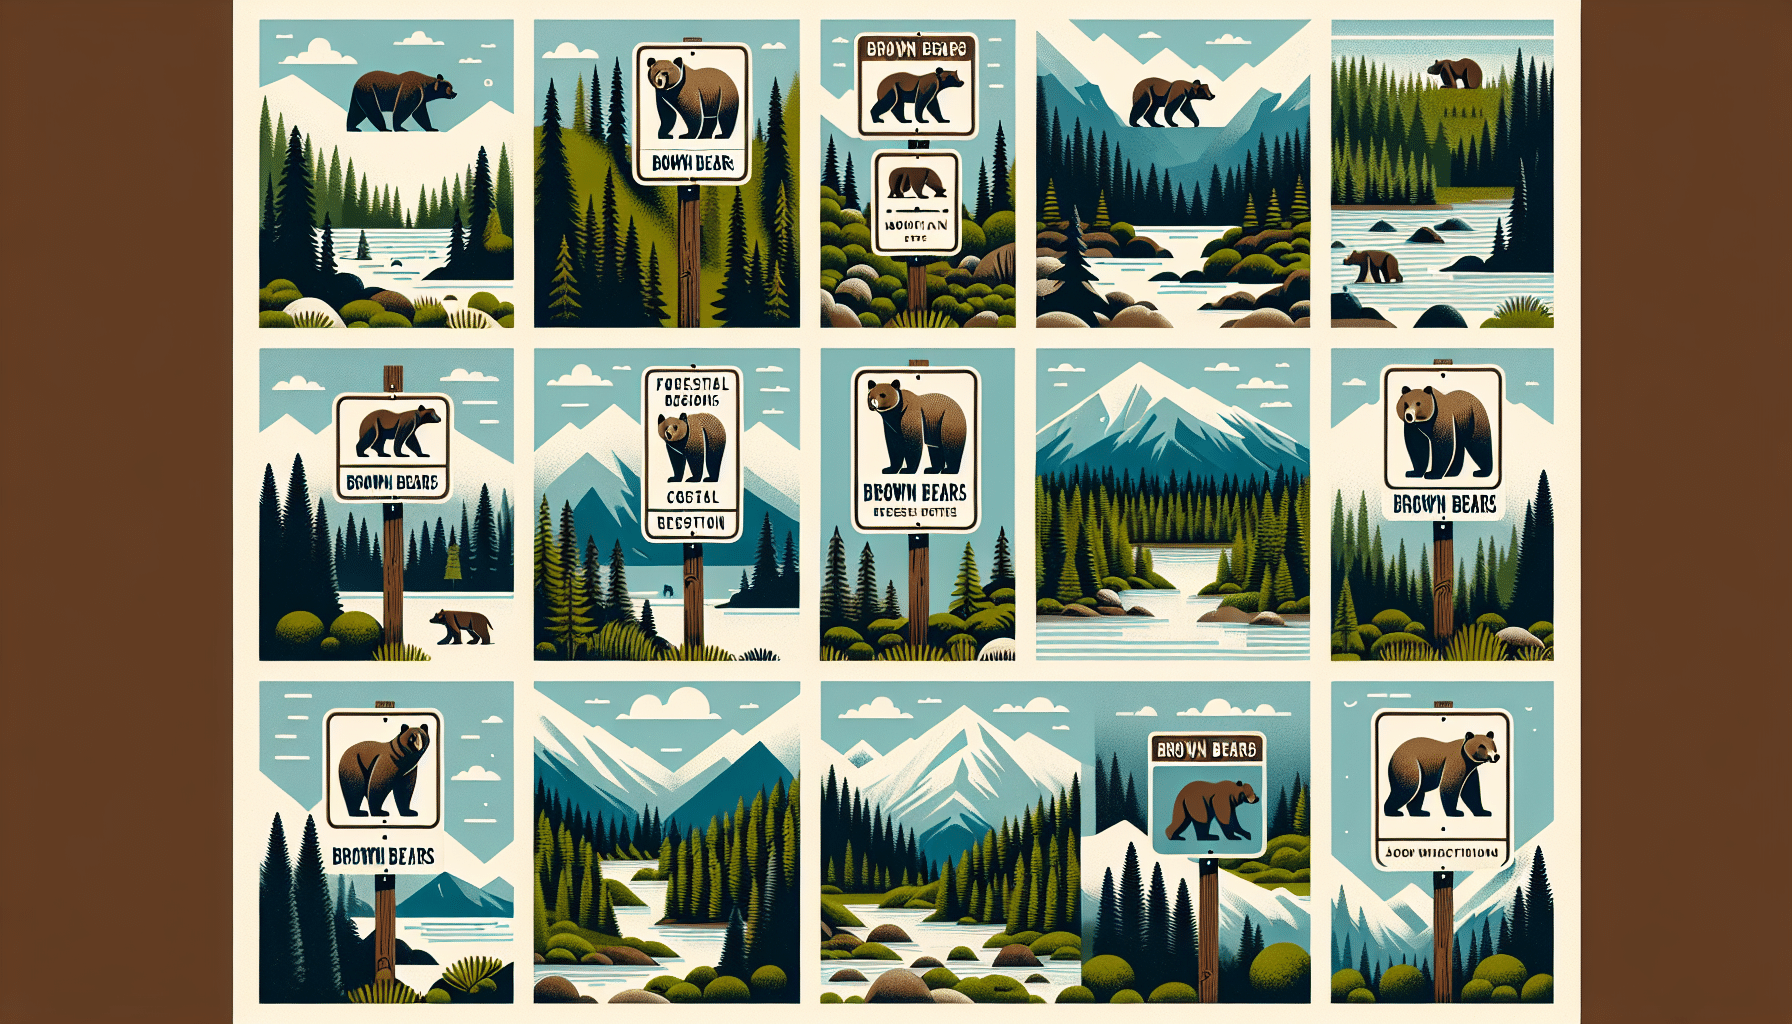 An assortment of forested regions from different states with signs symbolizing the presence of brown bears. The signs should not contain any text, but can have images of brown bears on them. The landscapes should differ from one another, showcasing coastal areas, mountain regions, and dense forests to represent diverse habitats of brown bears. There should be actual brown bears of different sizes and ages in each landscape to help visualize their prevalence.